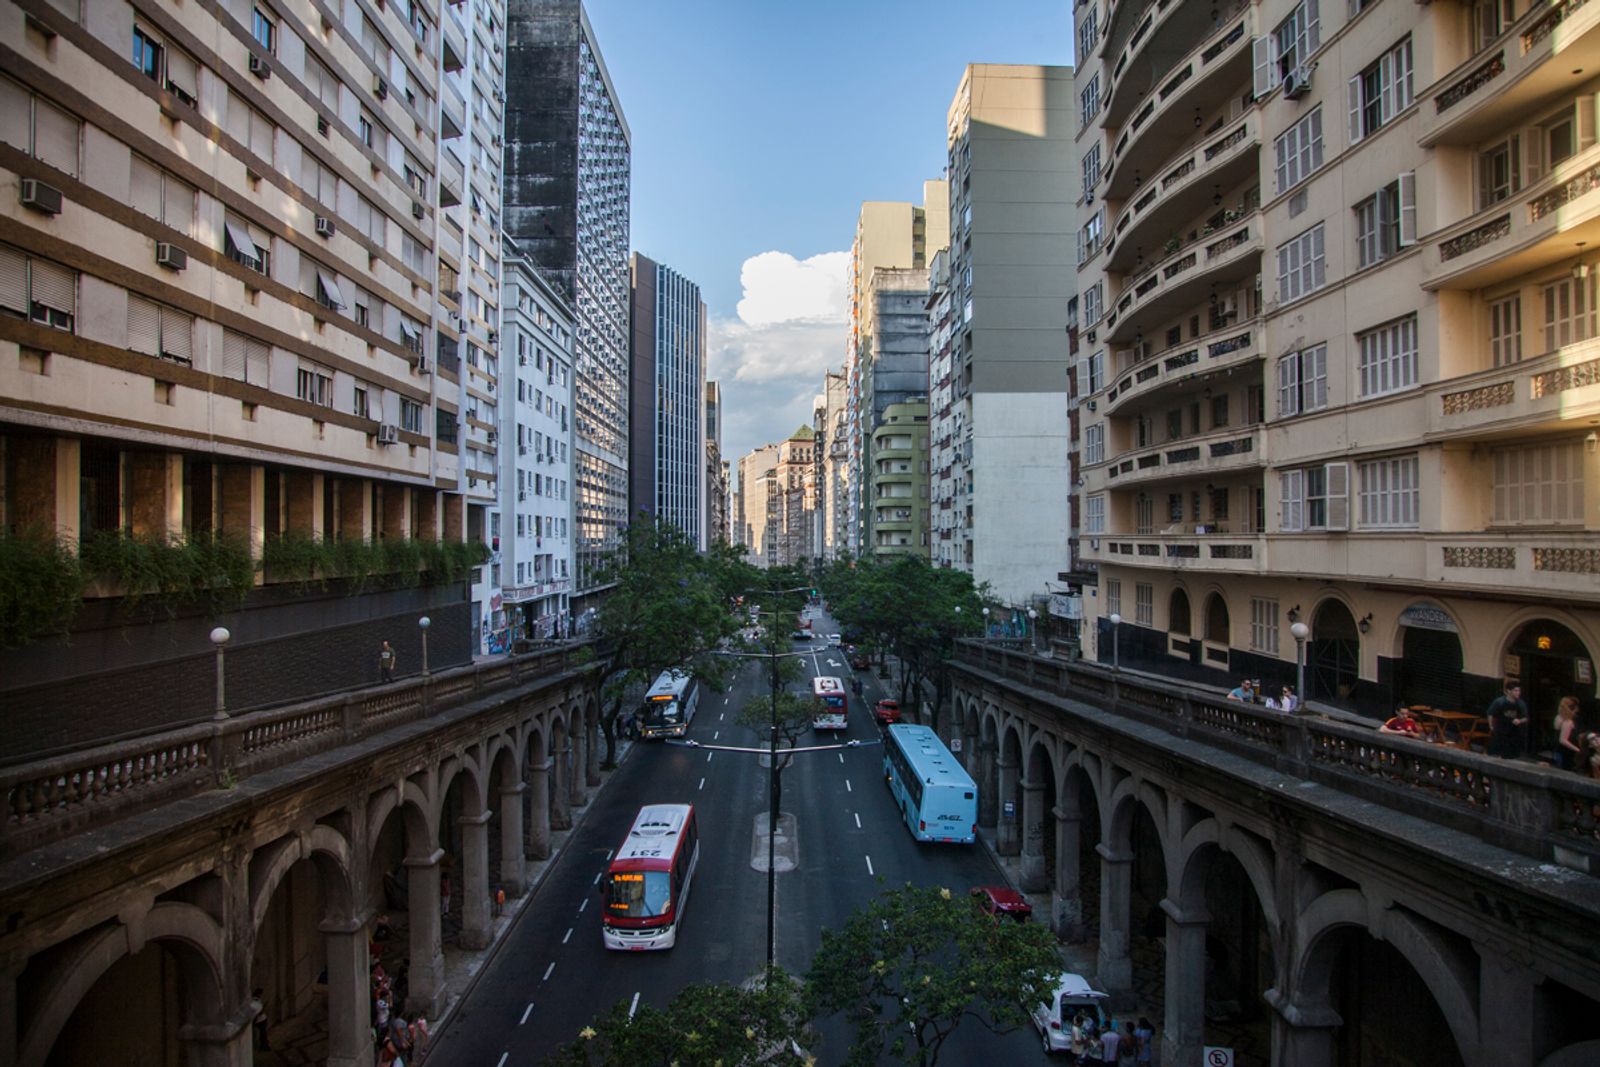 © Chiara Ferronato - A view of the centre of Porto Alegre, which most residents of condominios fechados consider unsafe to roam and to live in.